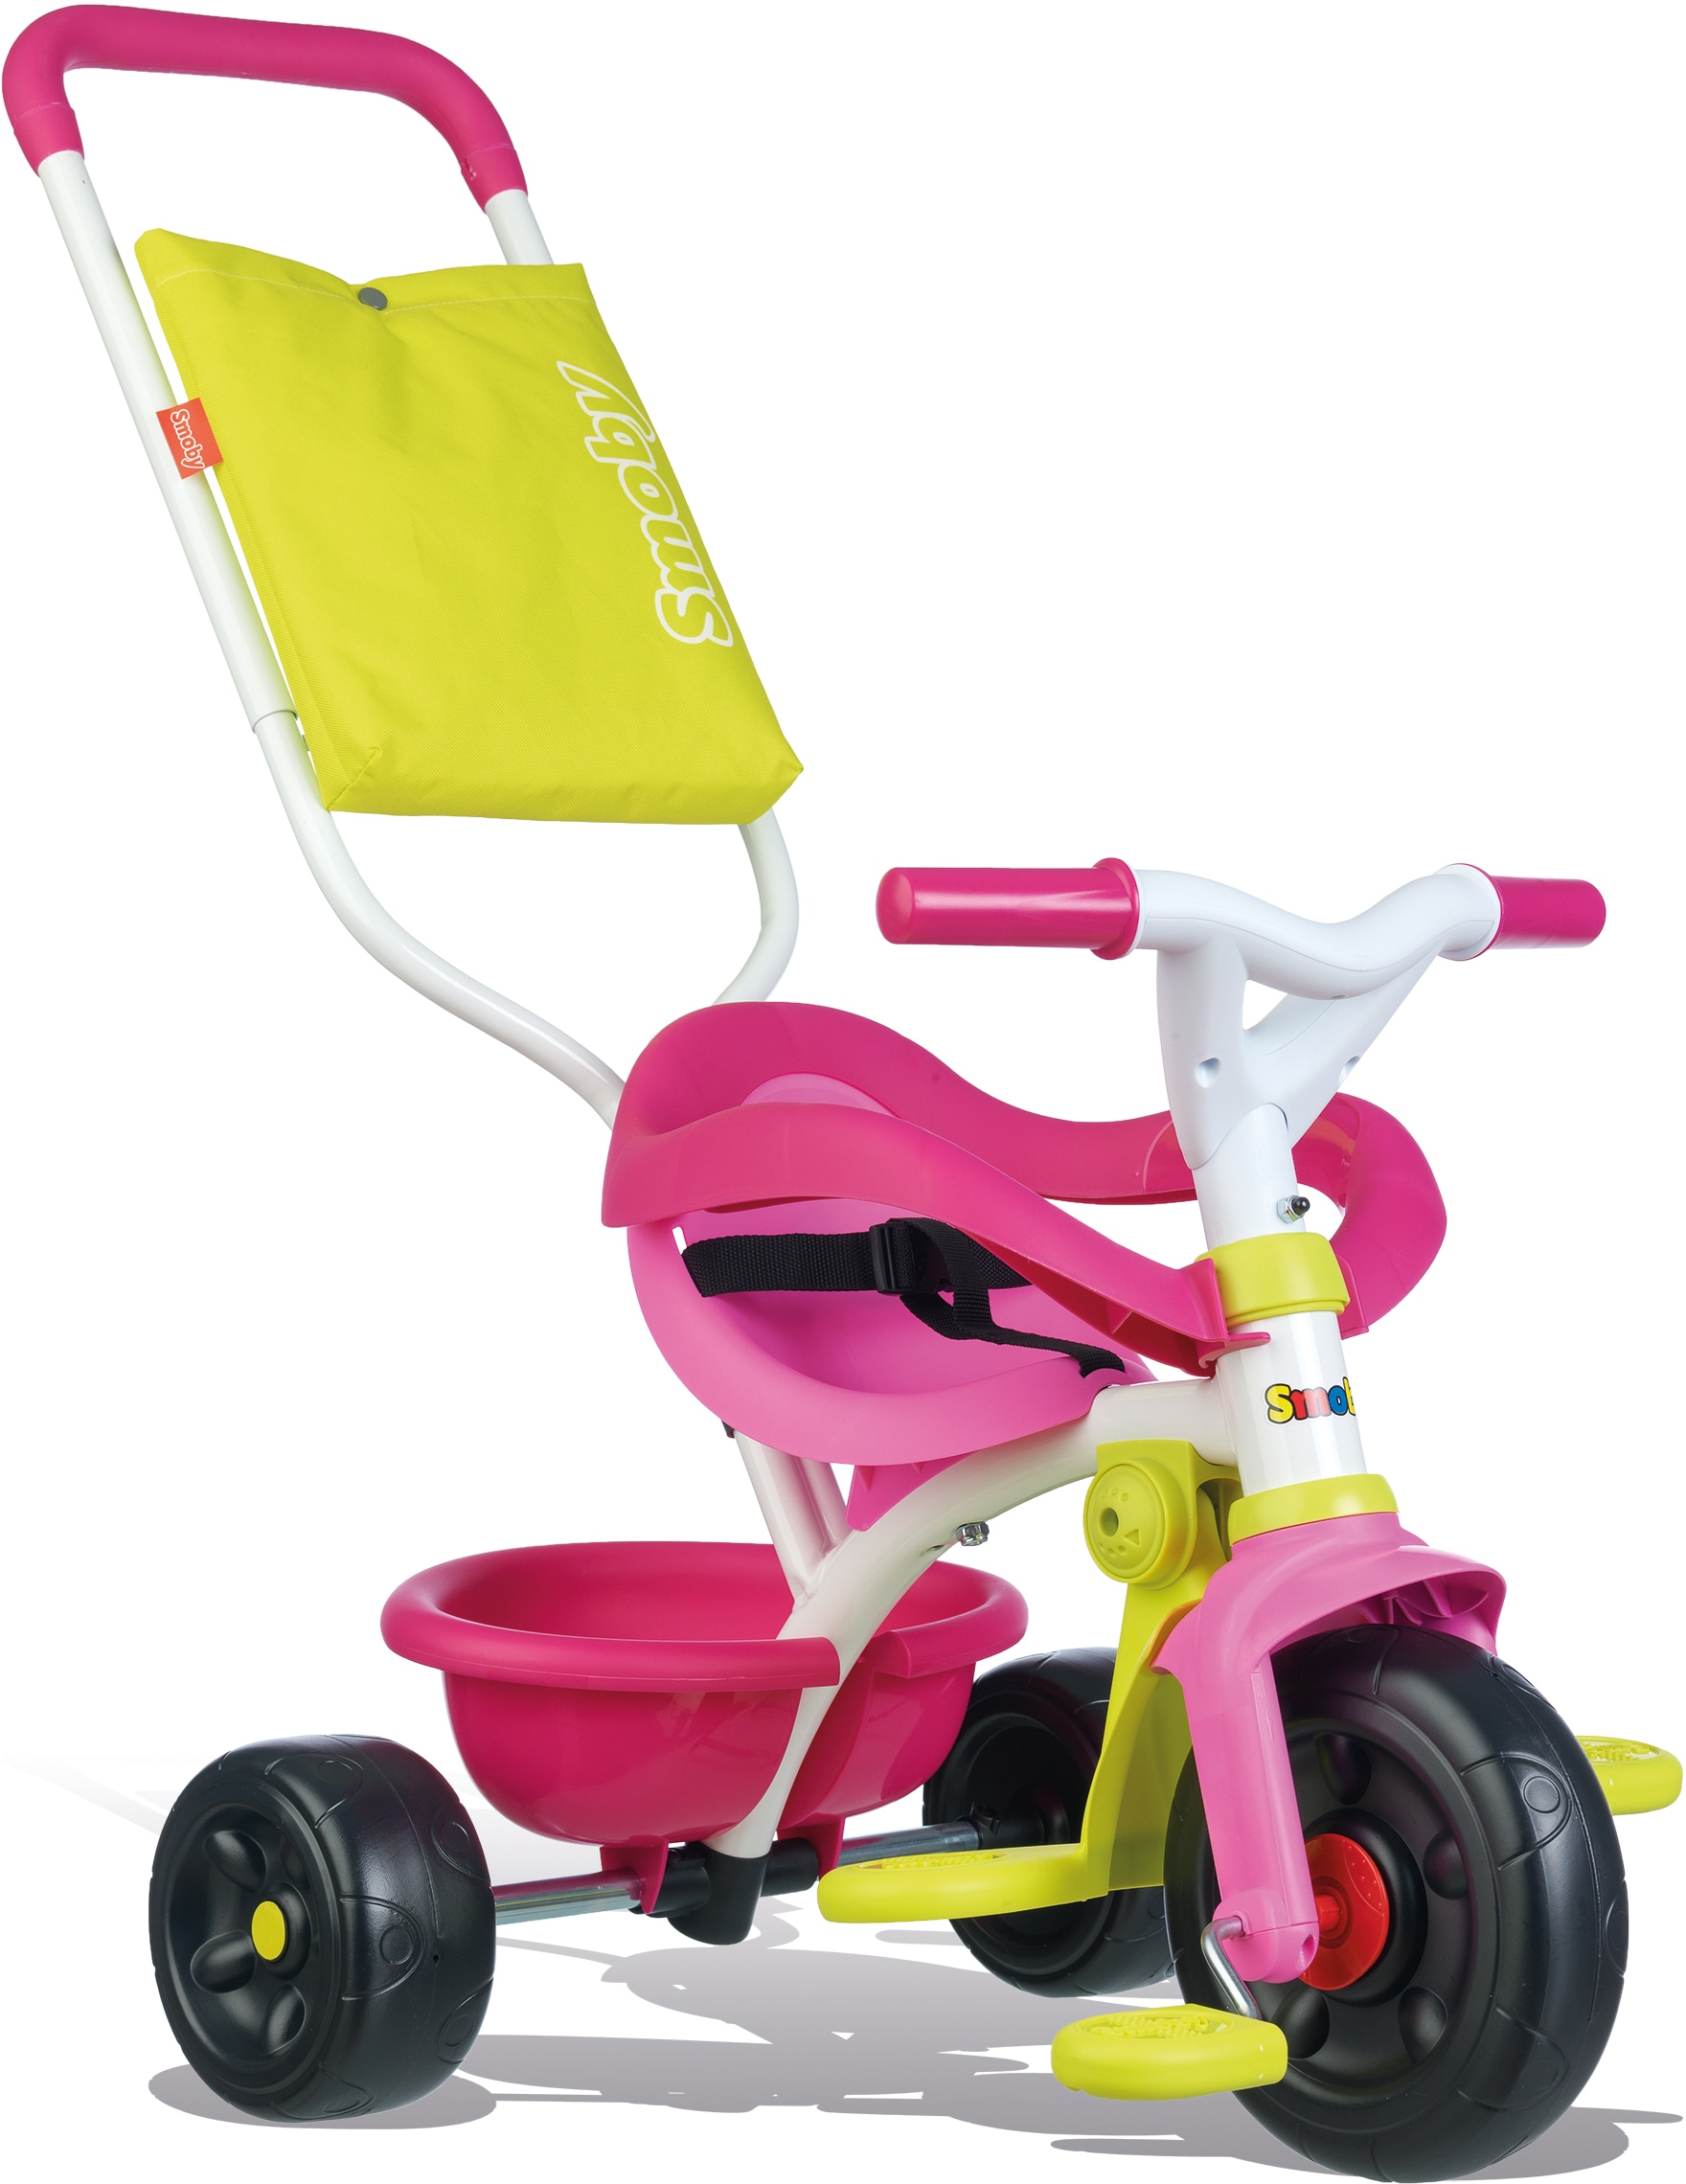 Smoby Dreirad »Be Fun Komfort, Europe rosa«, kaufen Made in bequem